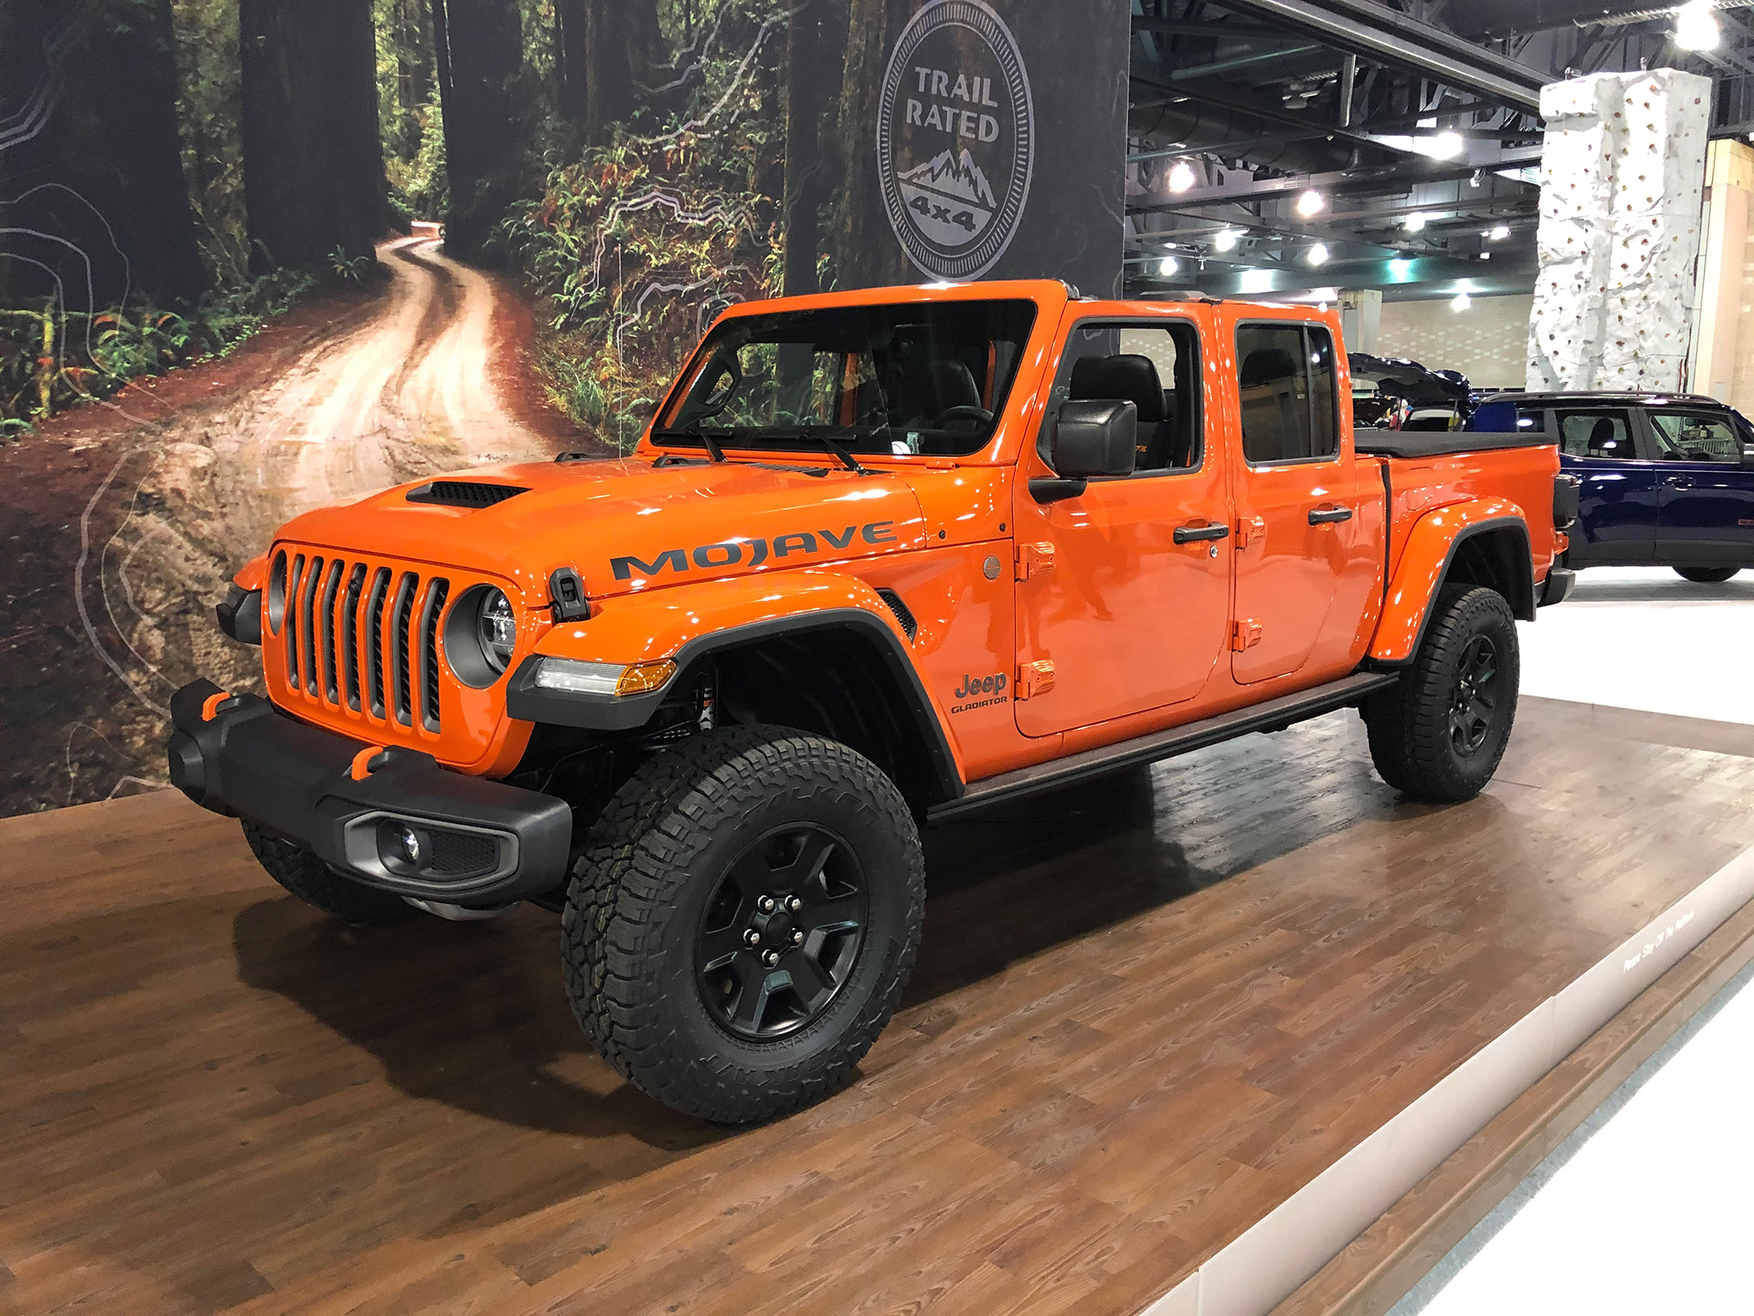 Jeep's Gladiator Mojave Edition Shows Off New 'Desert Rated' Capability